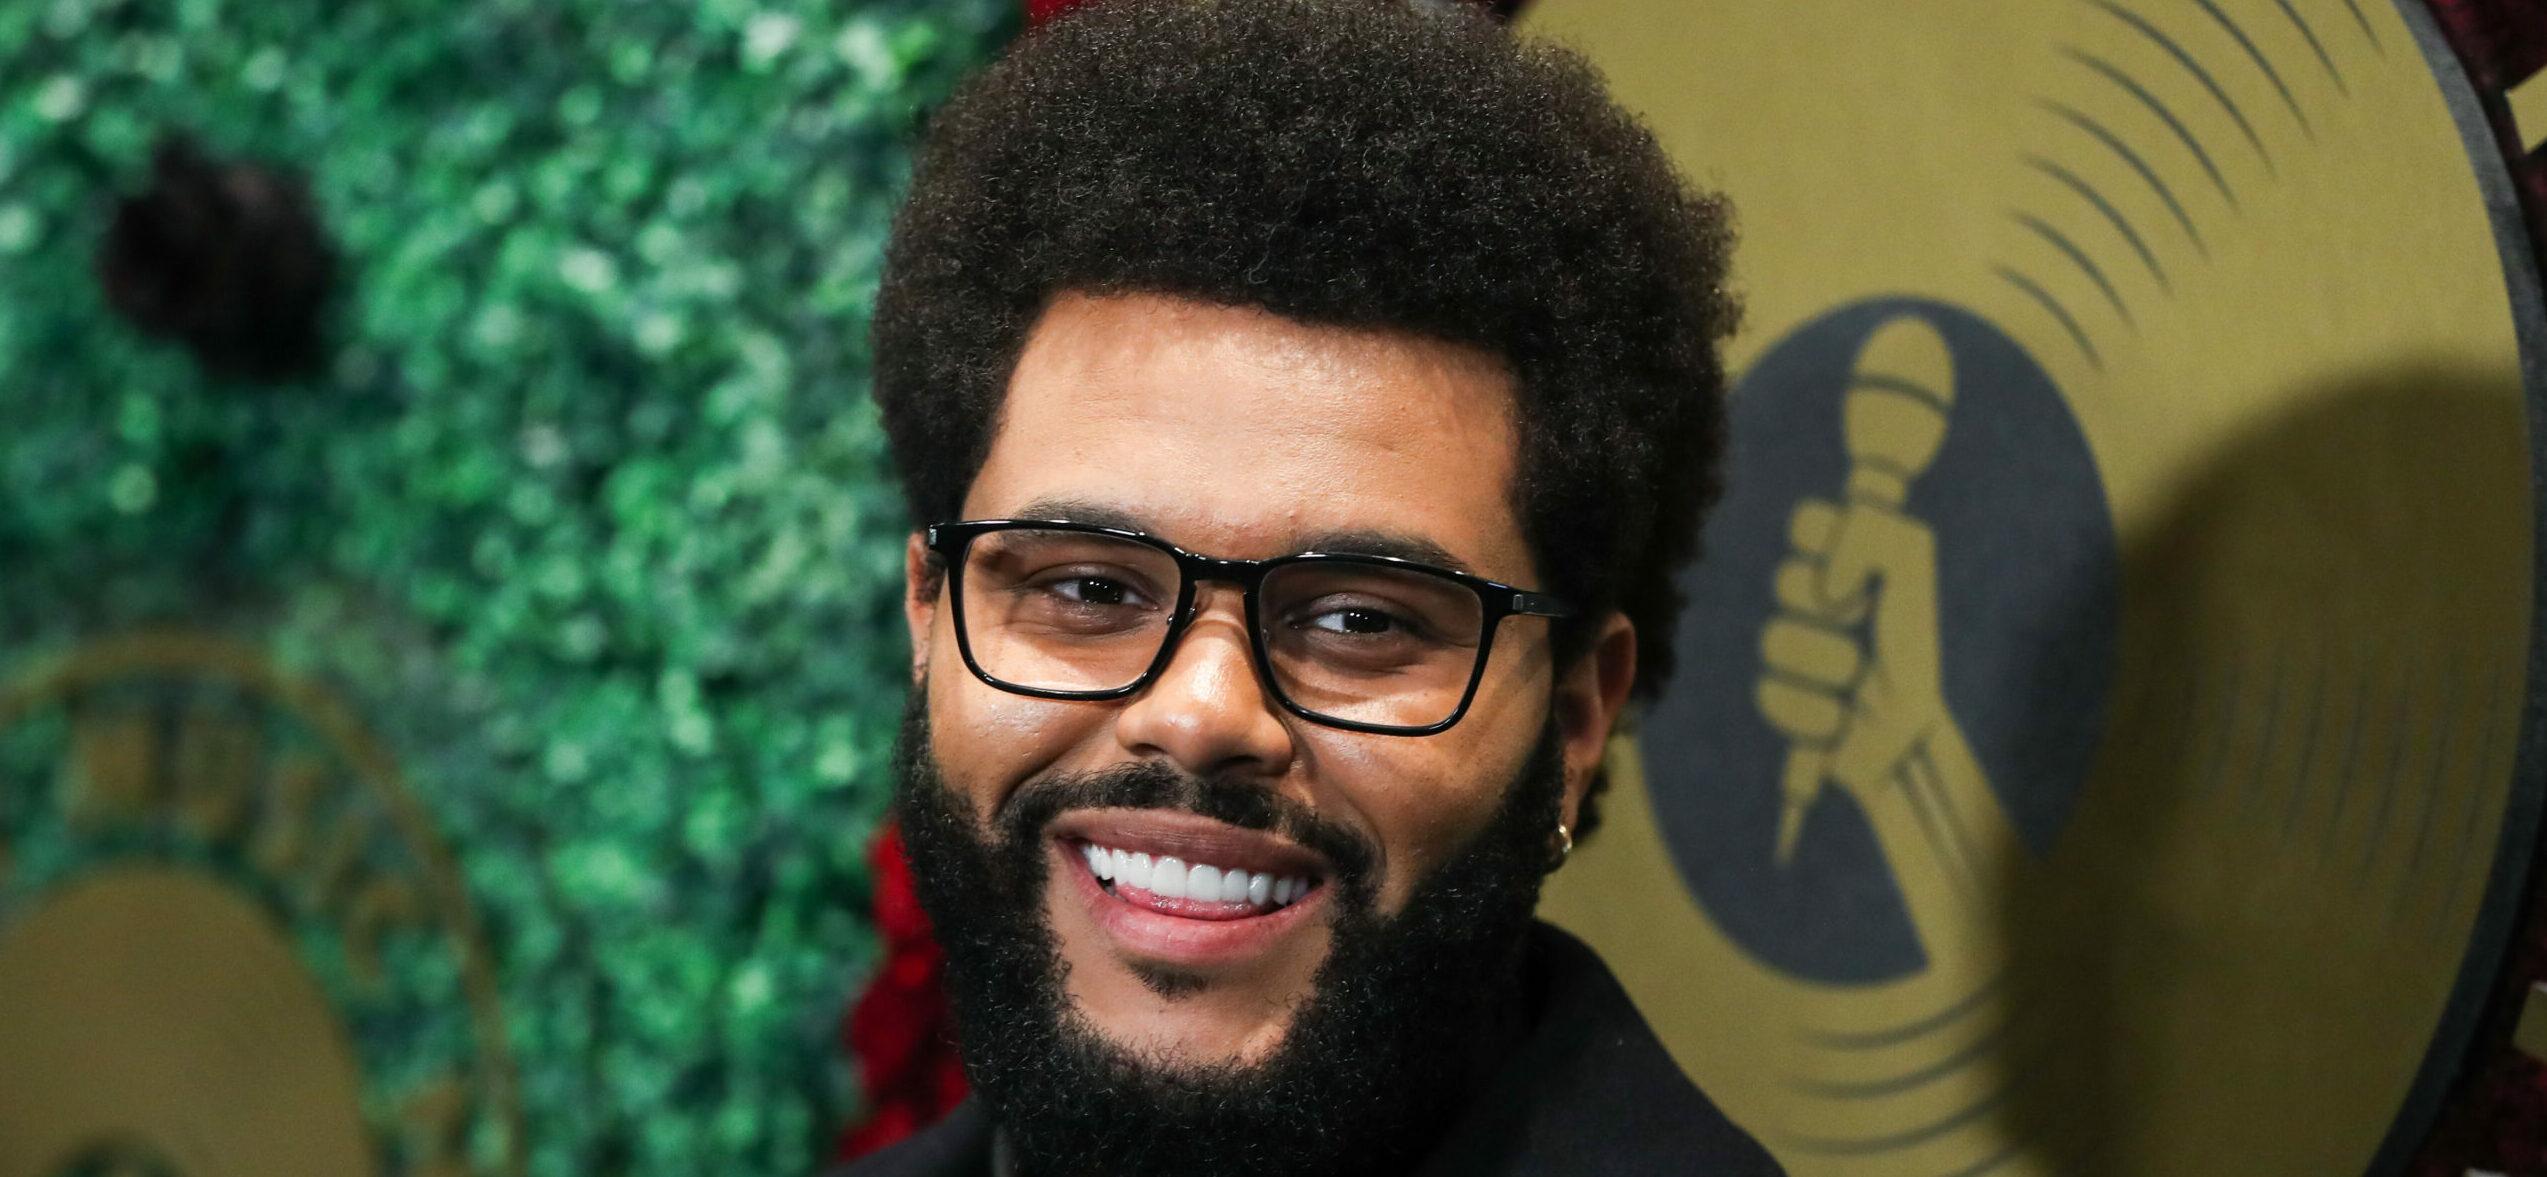 The Weeknd at the 1st Annual Black Music Action Coalition's Music in Action Awards